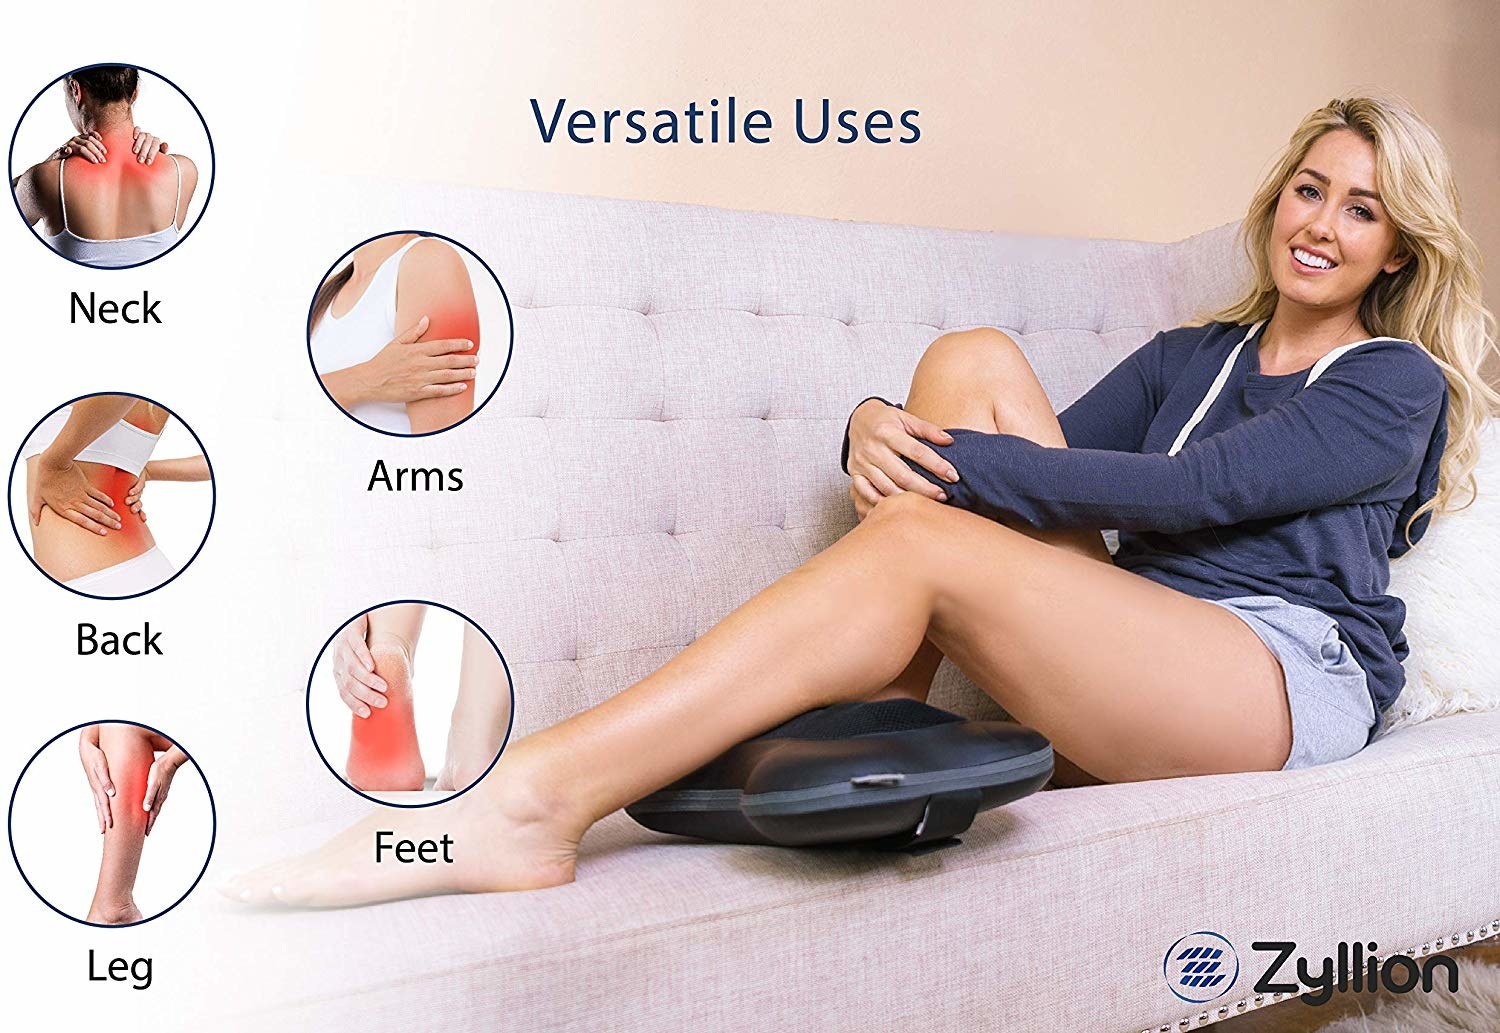 A model using it on their calf, plus images showing it working for necks, arms, backs, feet, and legs